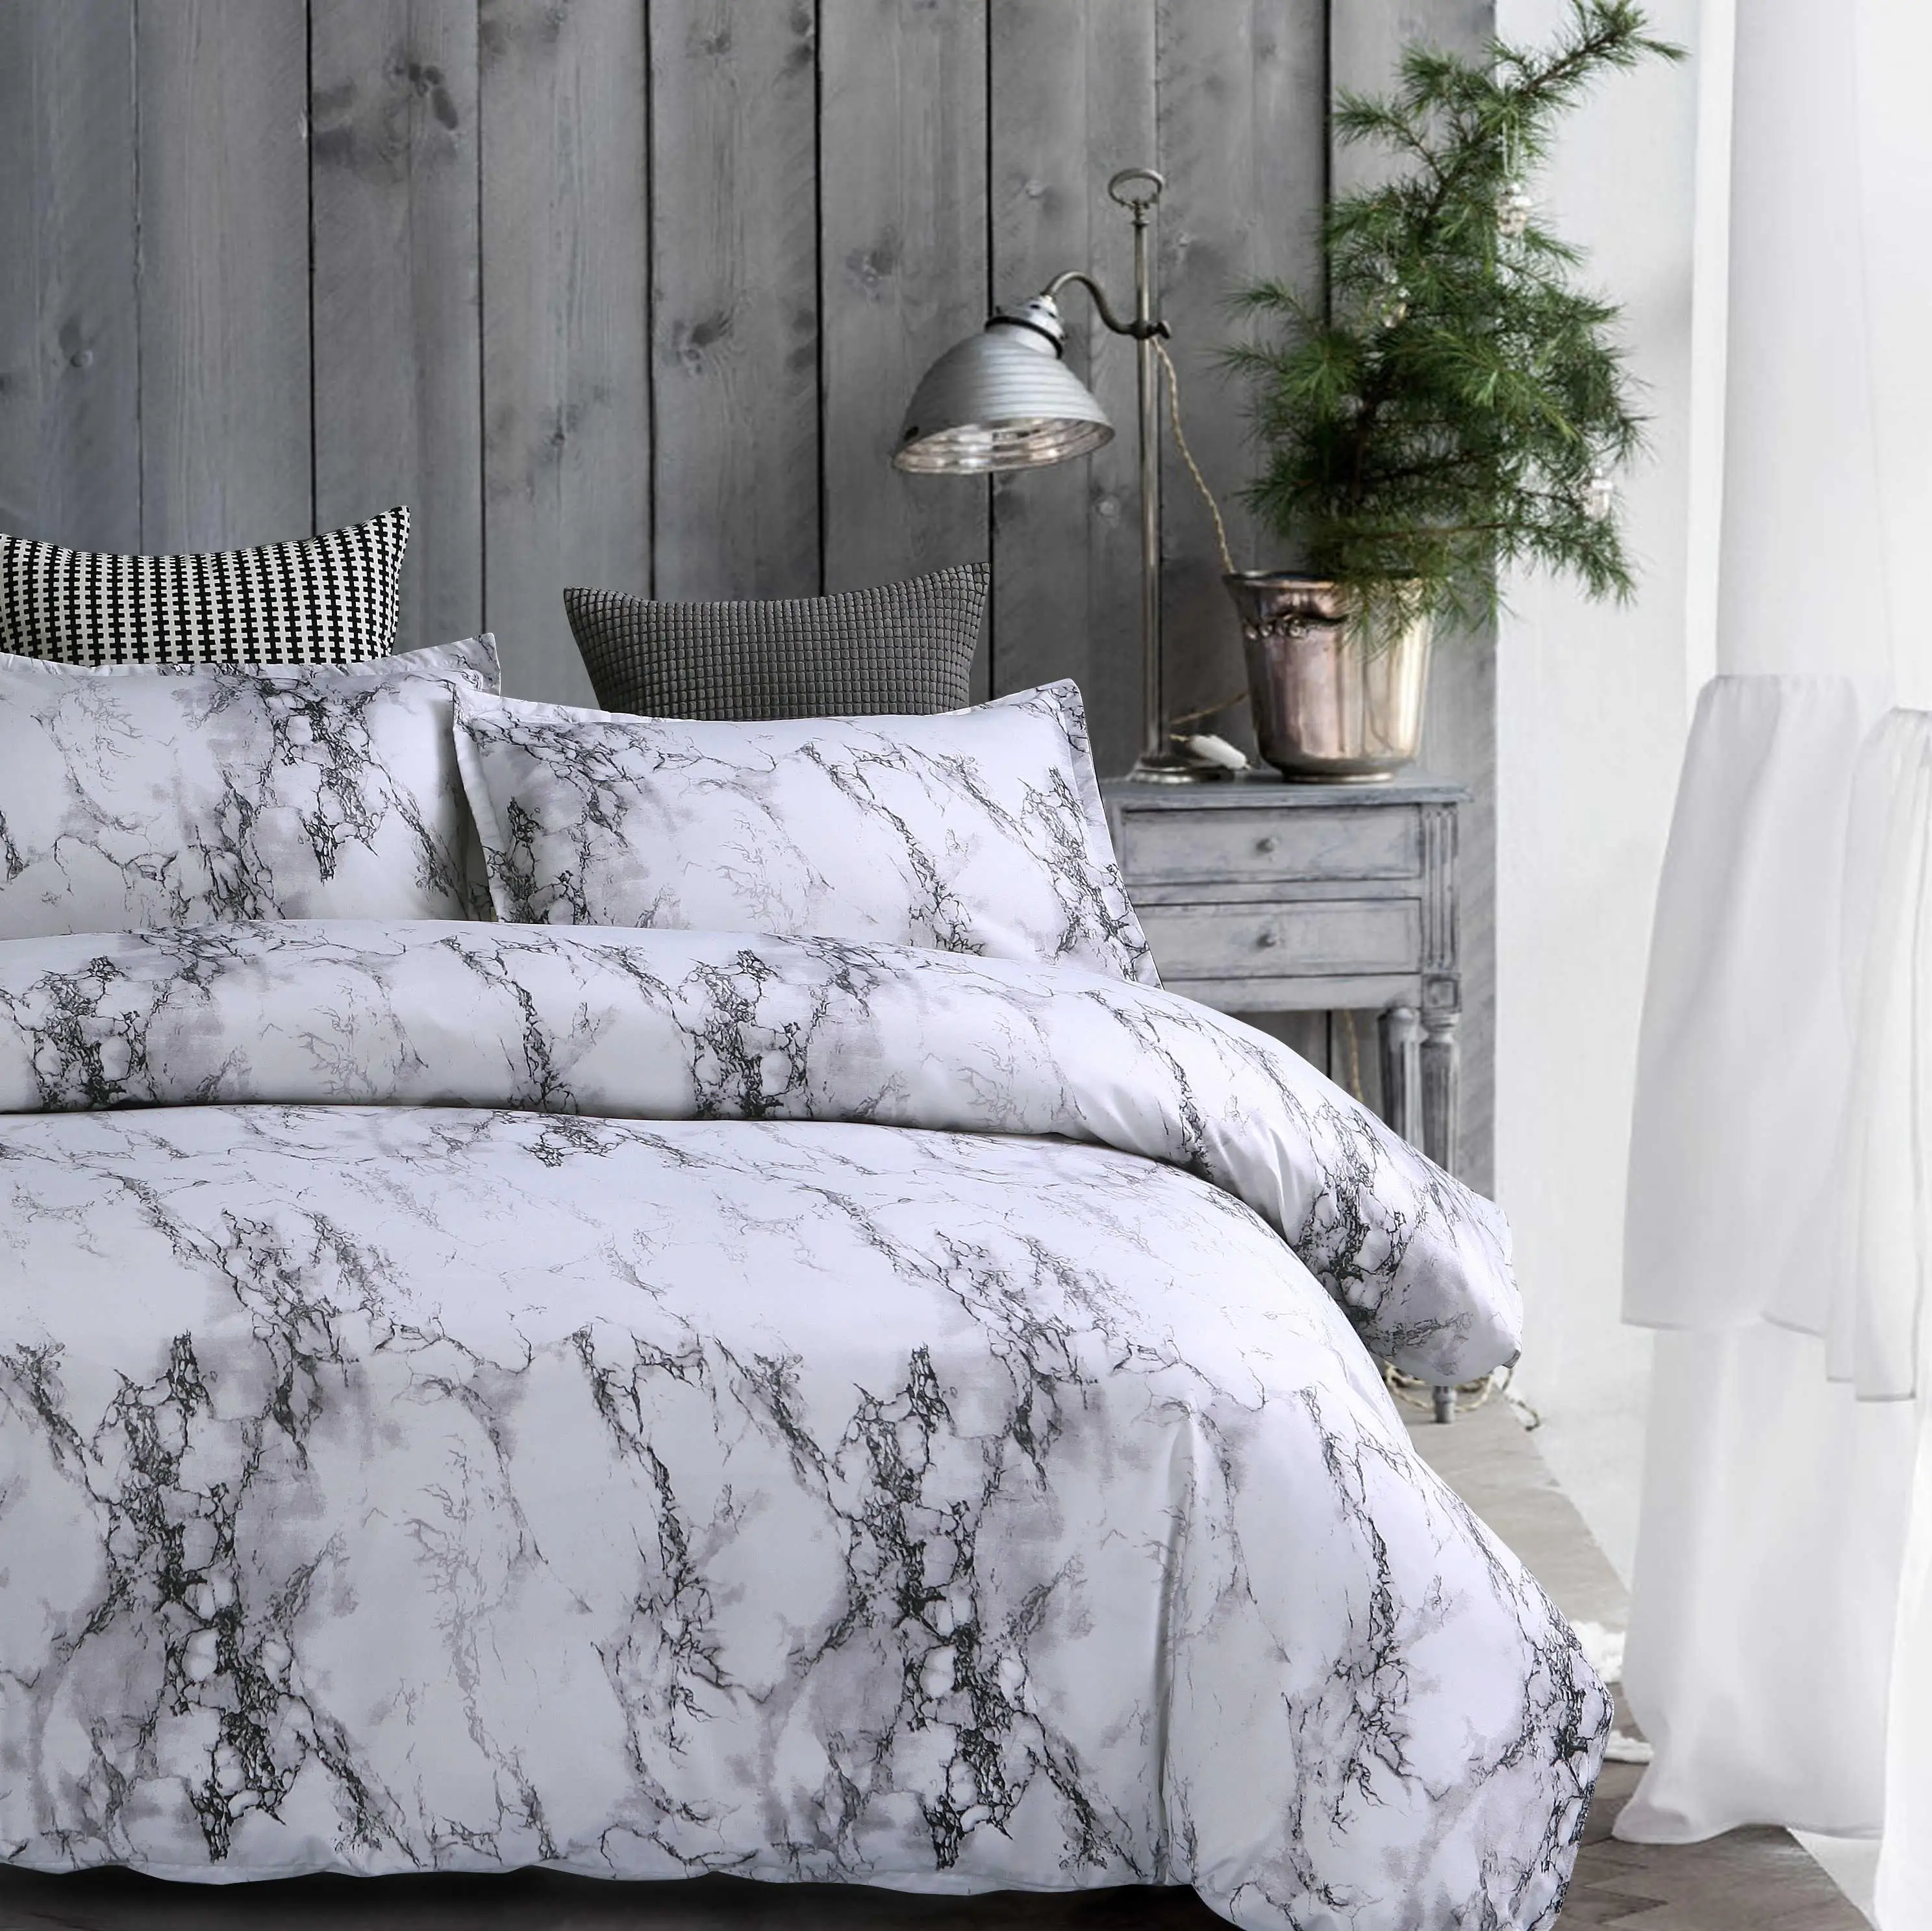 

50Bedding Set Printed Marble White Black Duvet Cover King Queen Size Quilt Cover Brief Bedclothes Comforter Cover 3Pcs Bed Linen